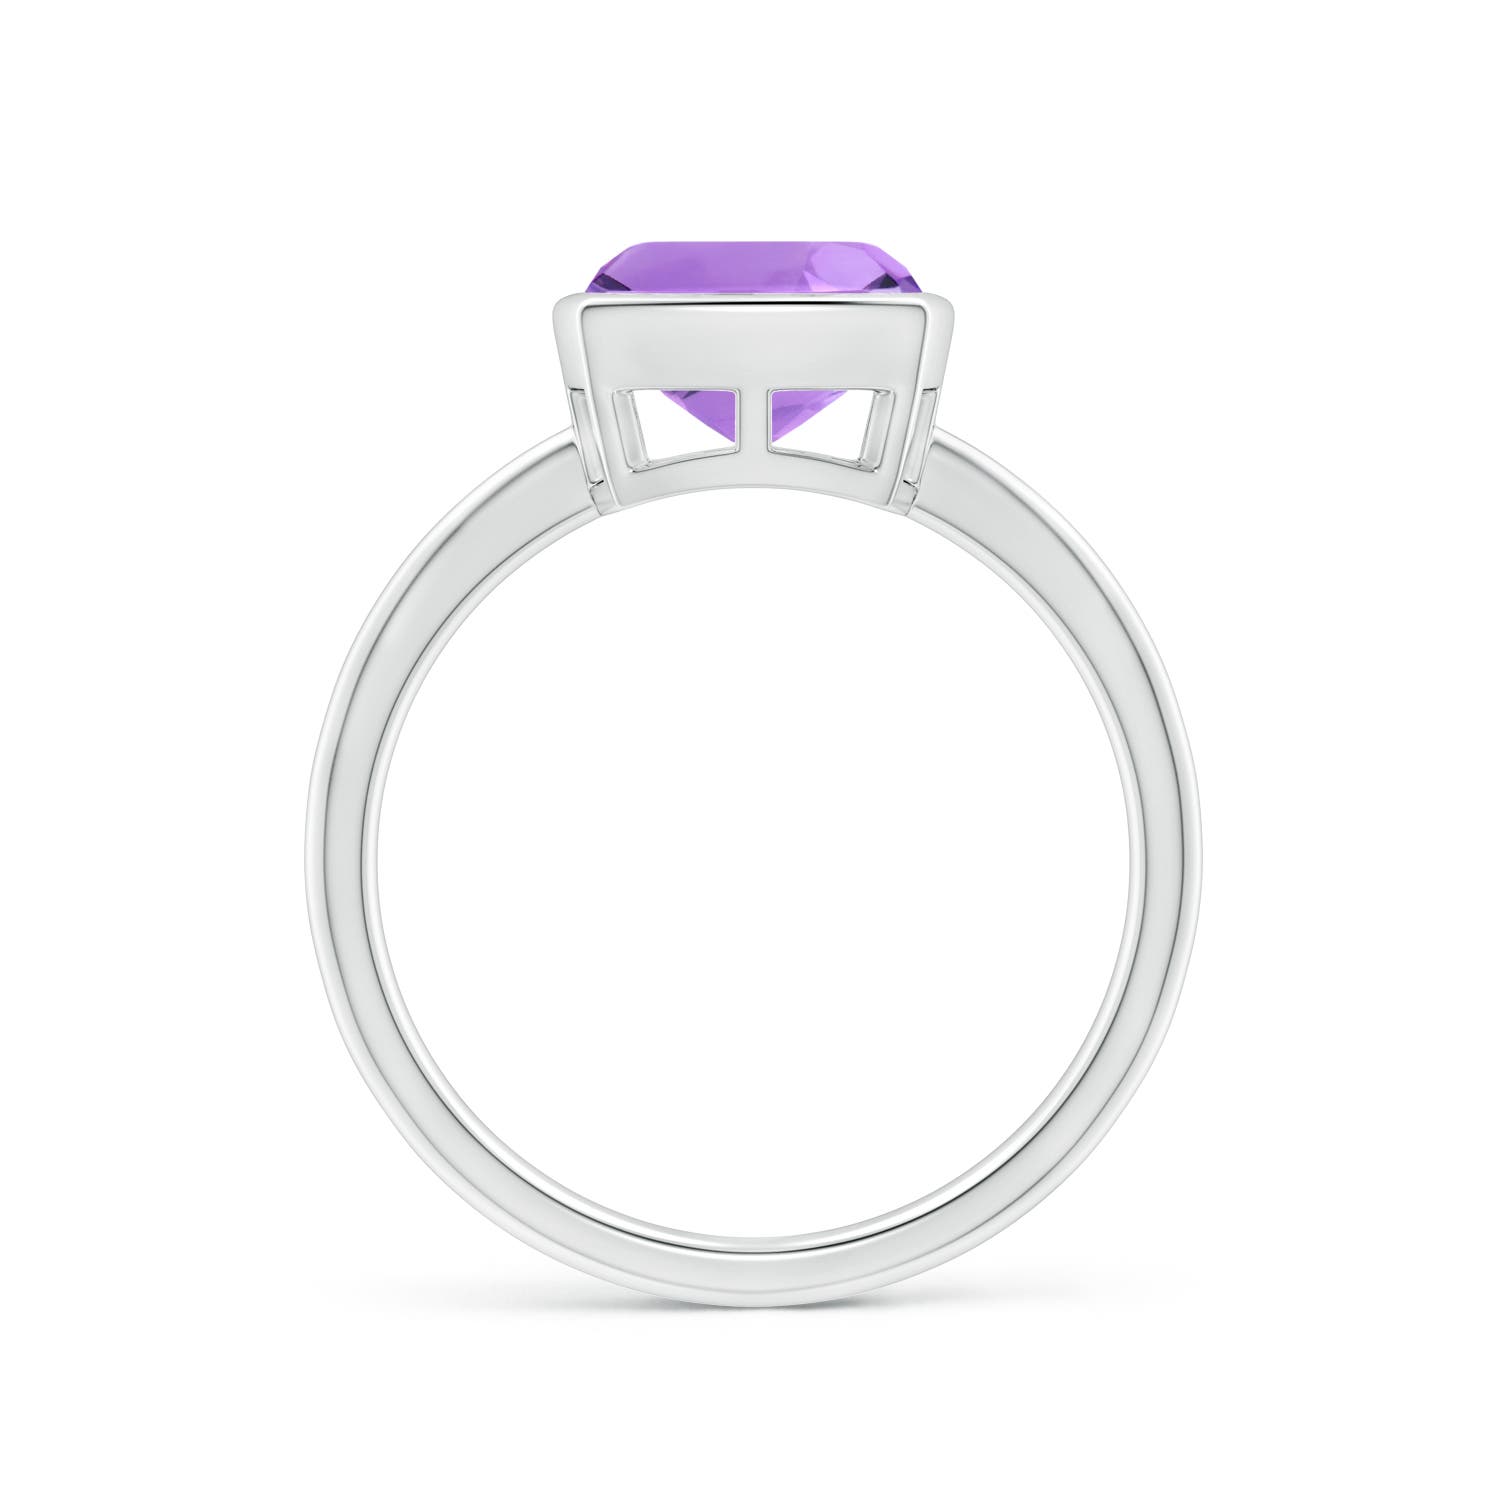 A - Amethyst / 2.2 CT / 14 KT White Gold